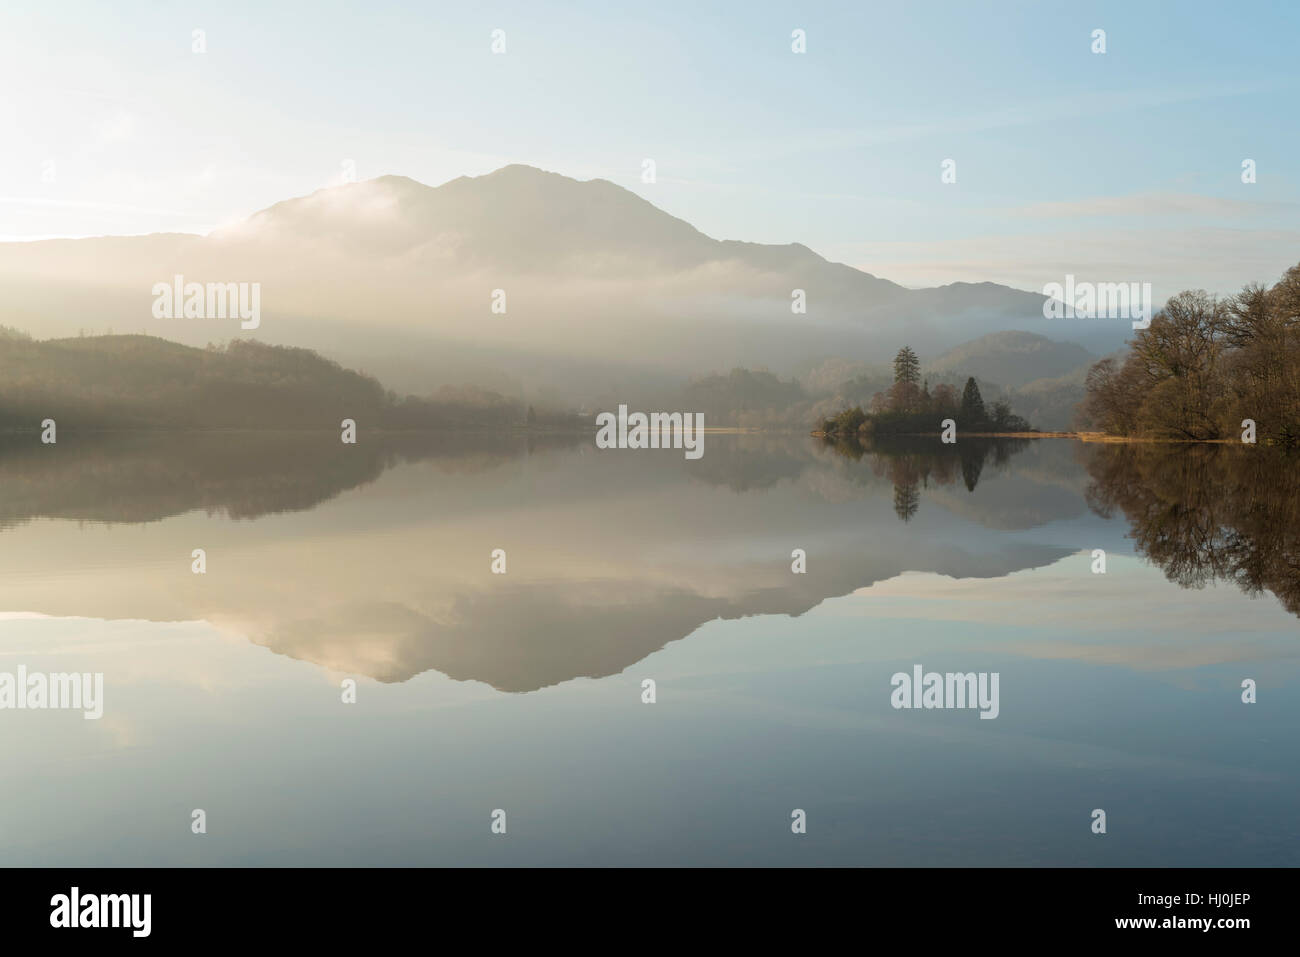 Stirlingshire, Scotland, UK. 21st January, 2017. Loch Achray in Loch Lomond and The Trossachs National Park, Scotland UK, Saturday 21st January 2017 UK weather: High pressure brings misty conditions to Loch Achray with Ben Venue mountain emerging from the clouds. Credit: Aidan Maccormick/Alamy Live News. Stock Photo